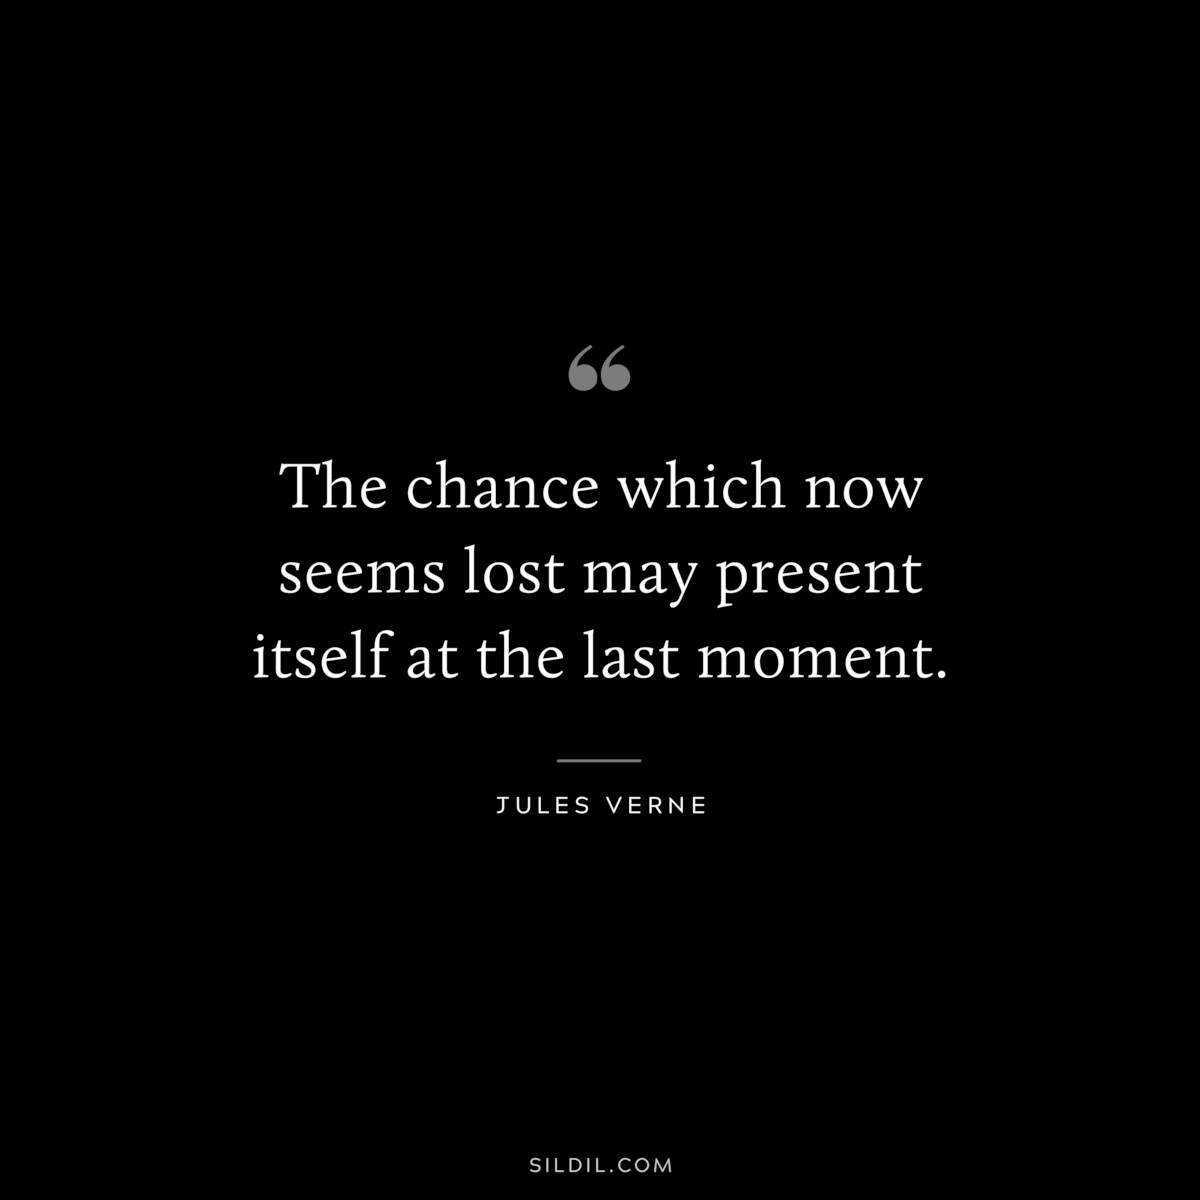 The chance which now seems lost may present itself at the last moment.